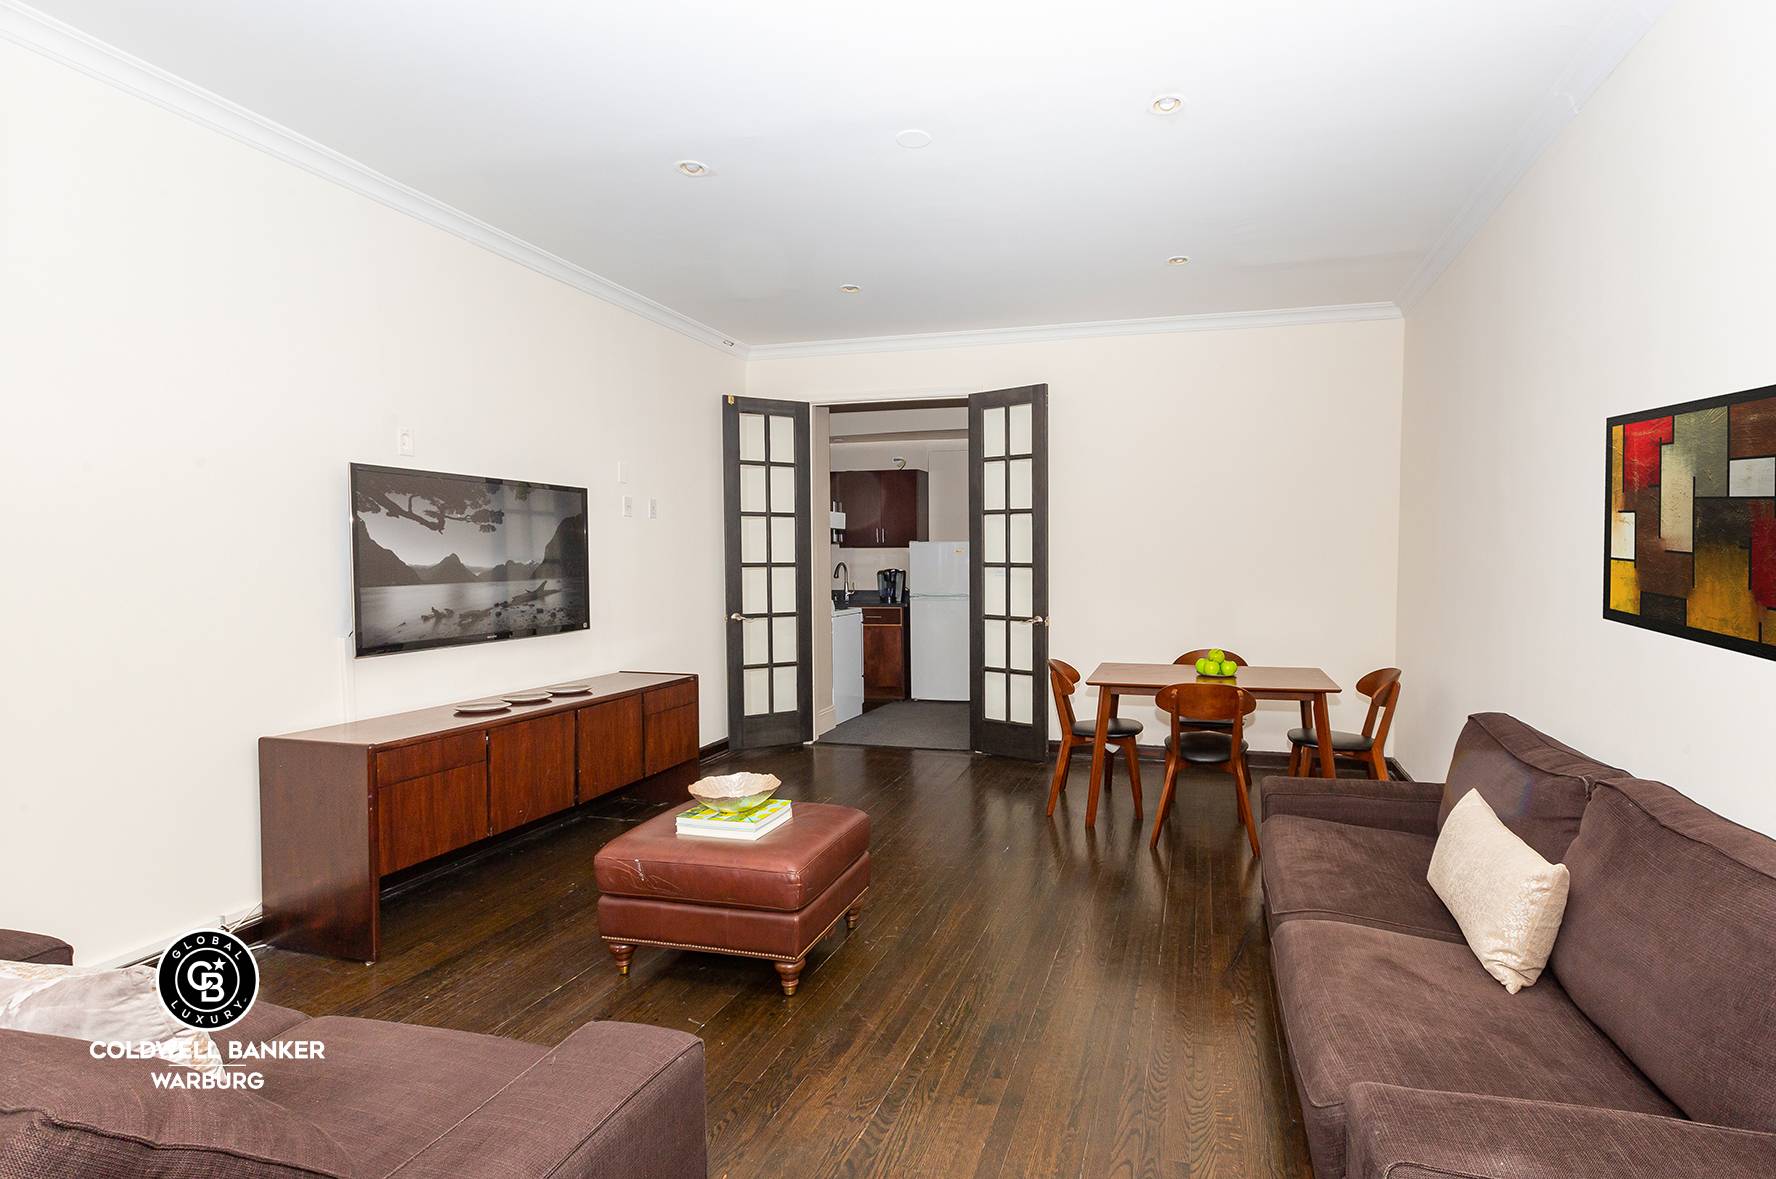 Expansive rooms with over nine foot ceilings, a private patio, and an additional sunroom home office, make this spacious two bedroom, one bath Hell's Kitchen apartment unique in the neighborhood.